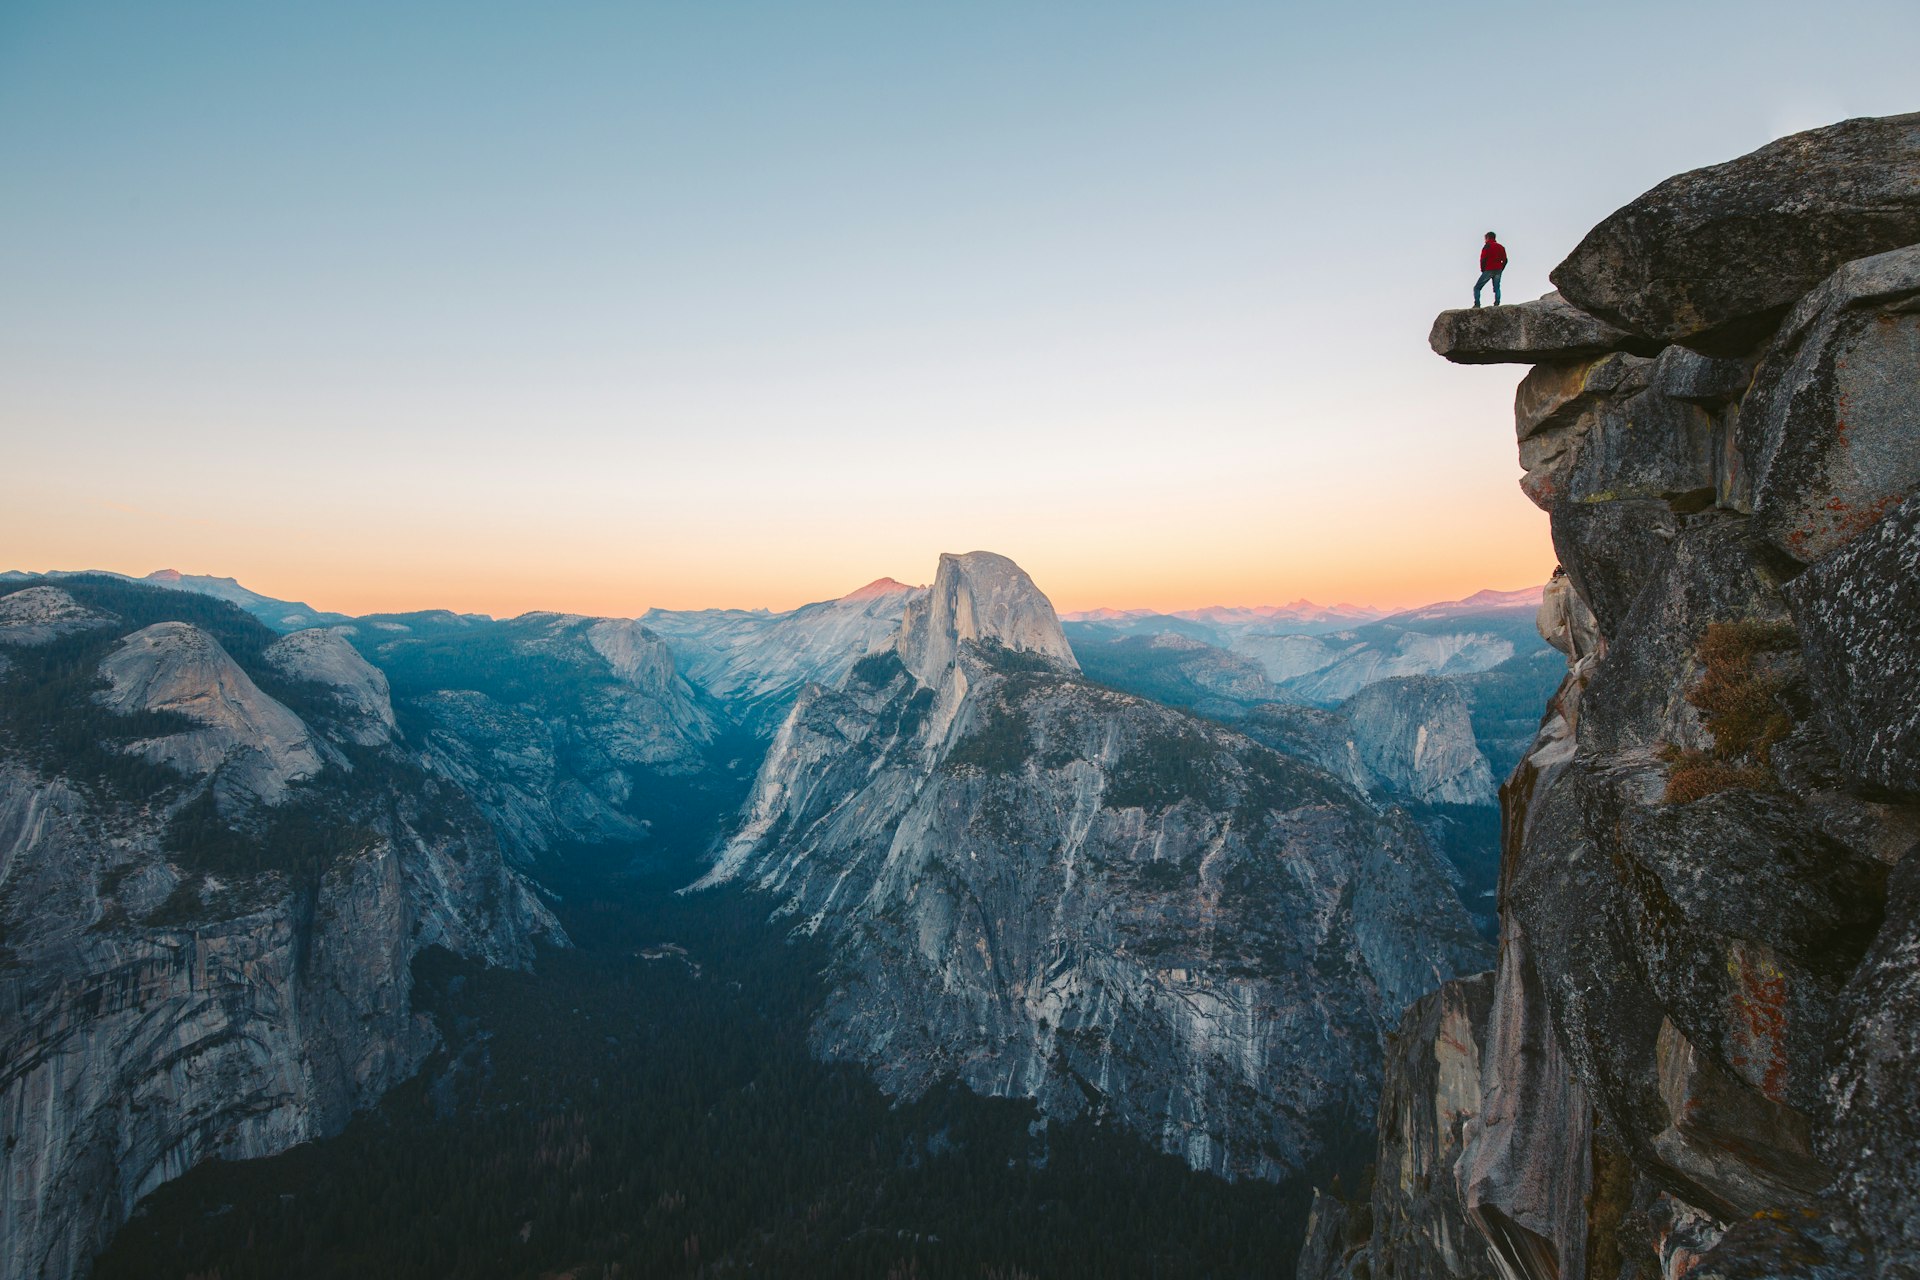 Hiker standing on an overhanging rock and taking in the view at Glacier Point overlook during the evening